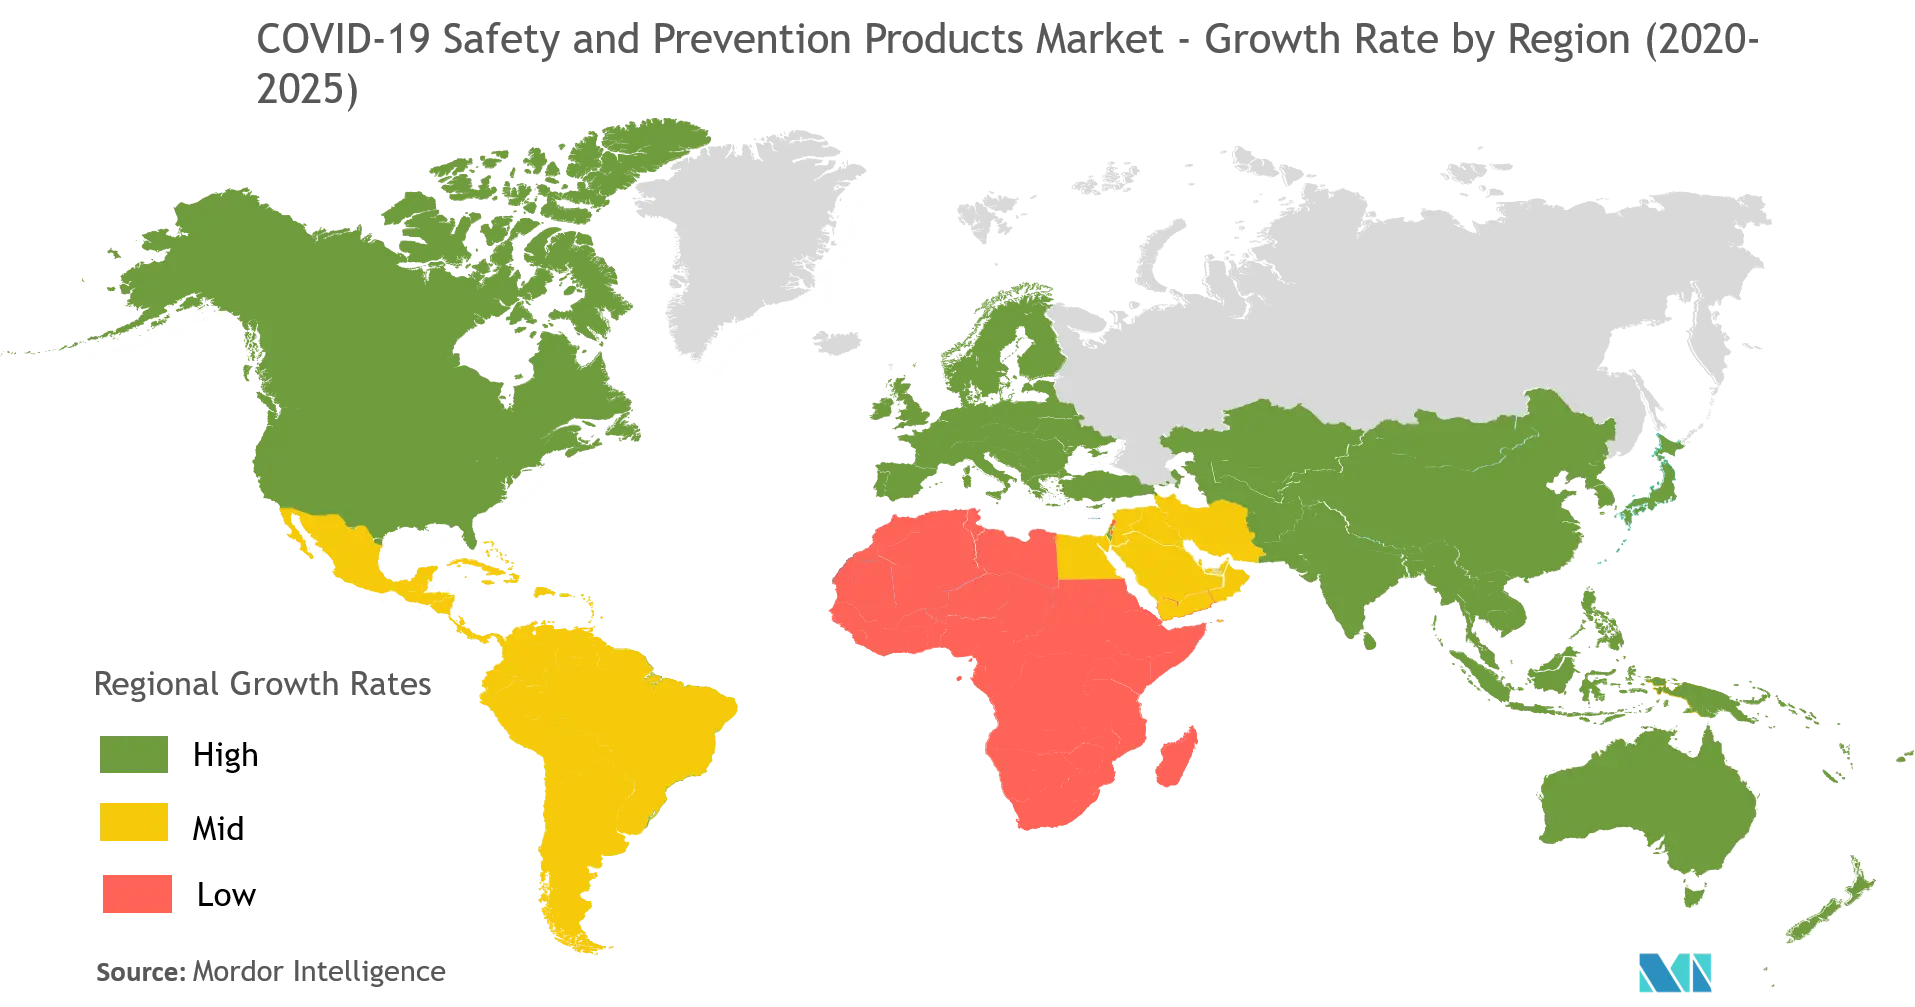 COVID-19 Safety and Prevention Products Market Share